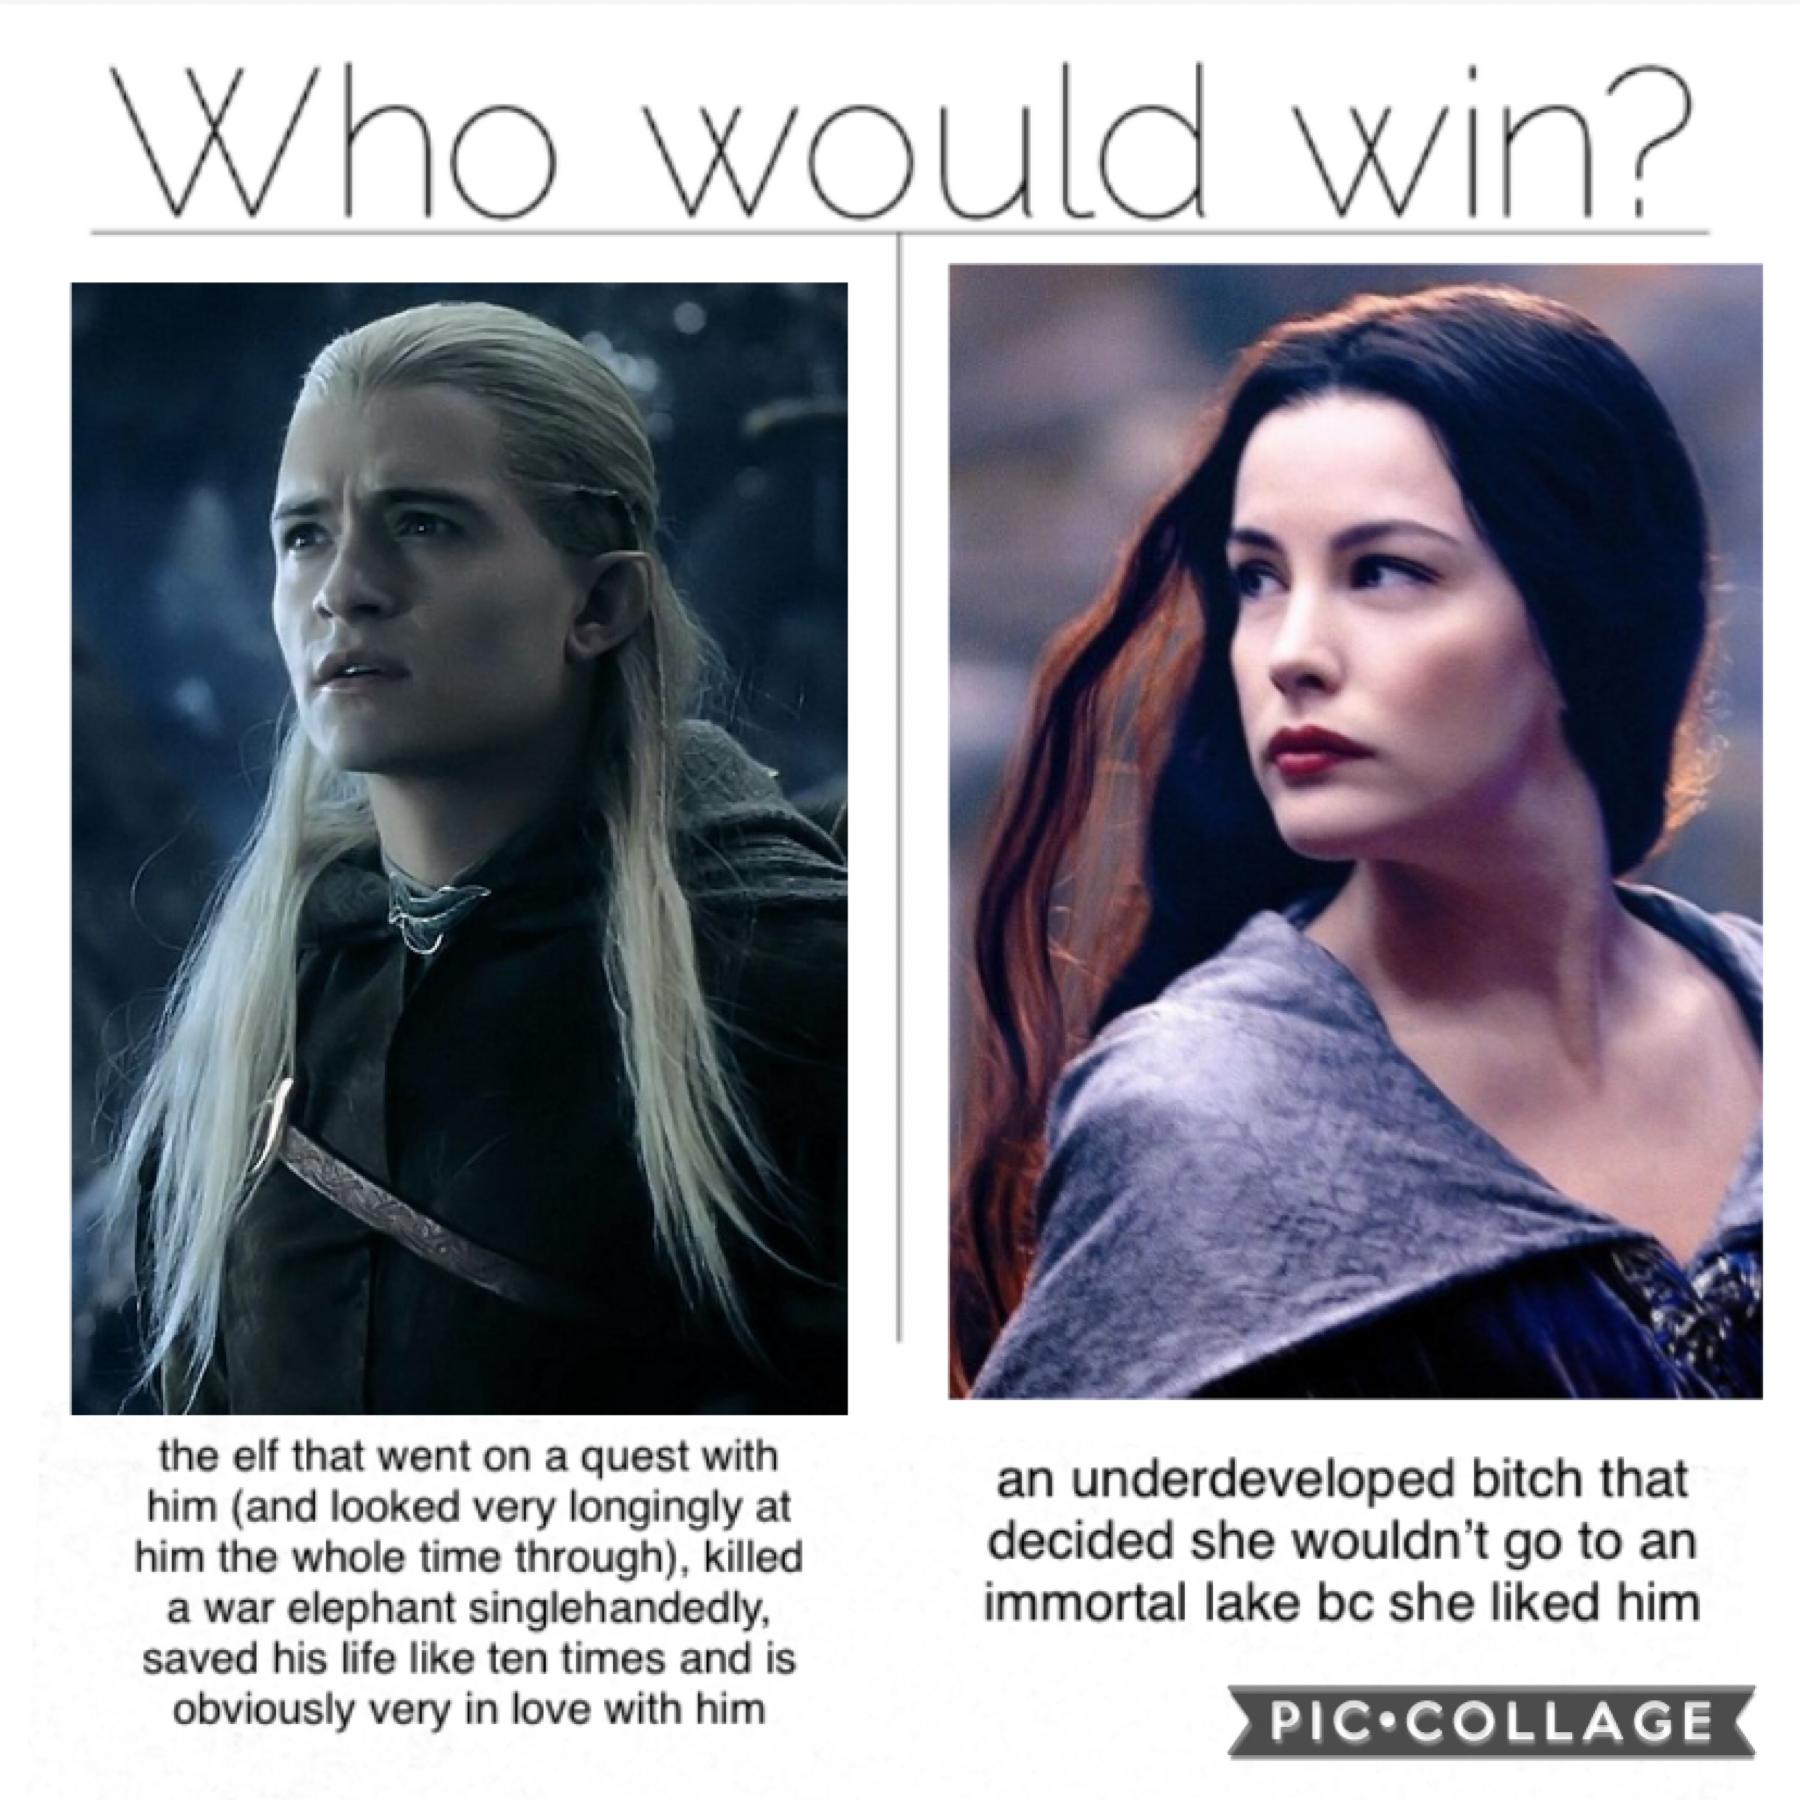 y’all are all like “Arwen gave up her immortality for Aragorn bla bla bla” but like- legolas would have died any moment of that quest if it meant saving Aragorn 